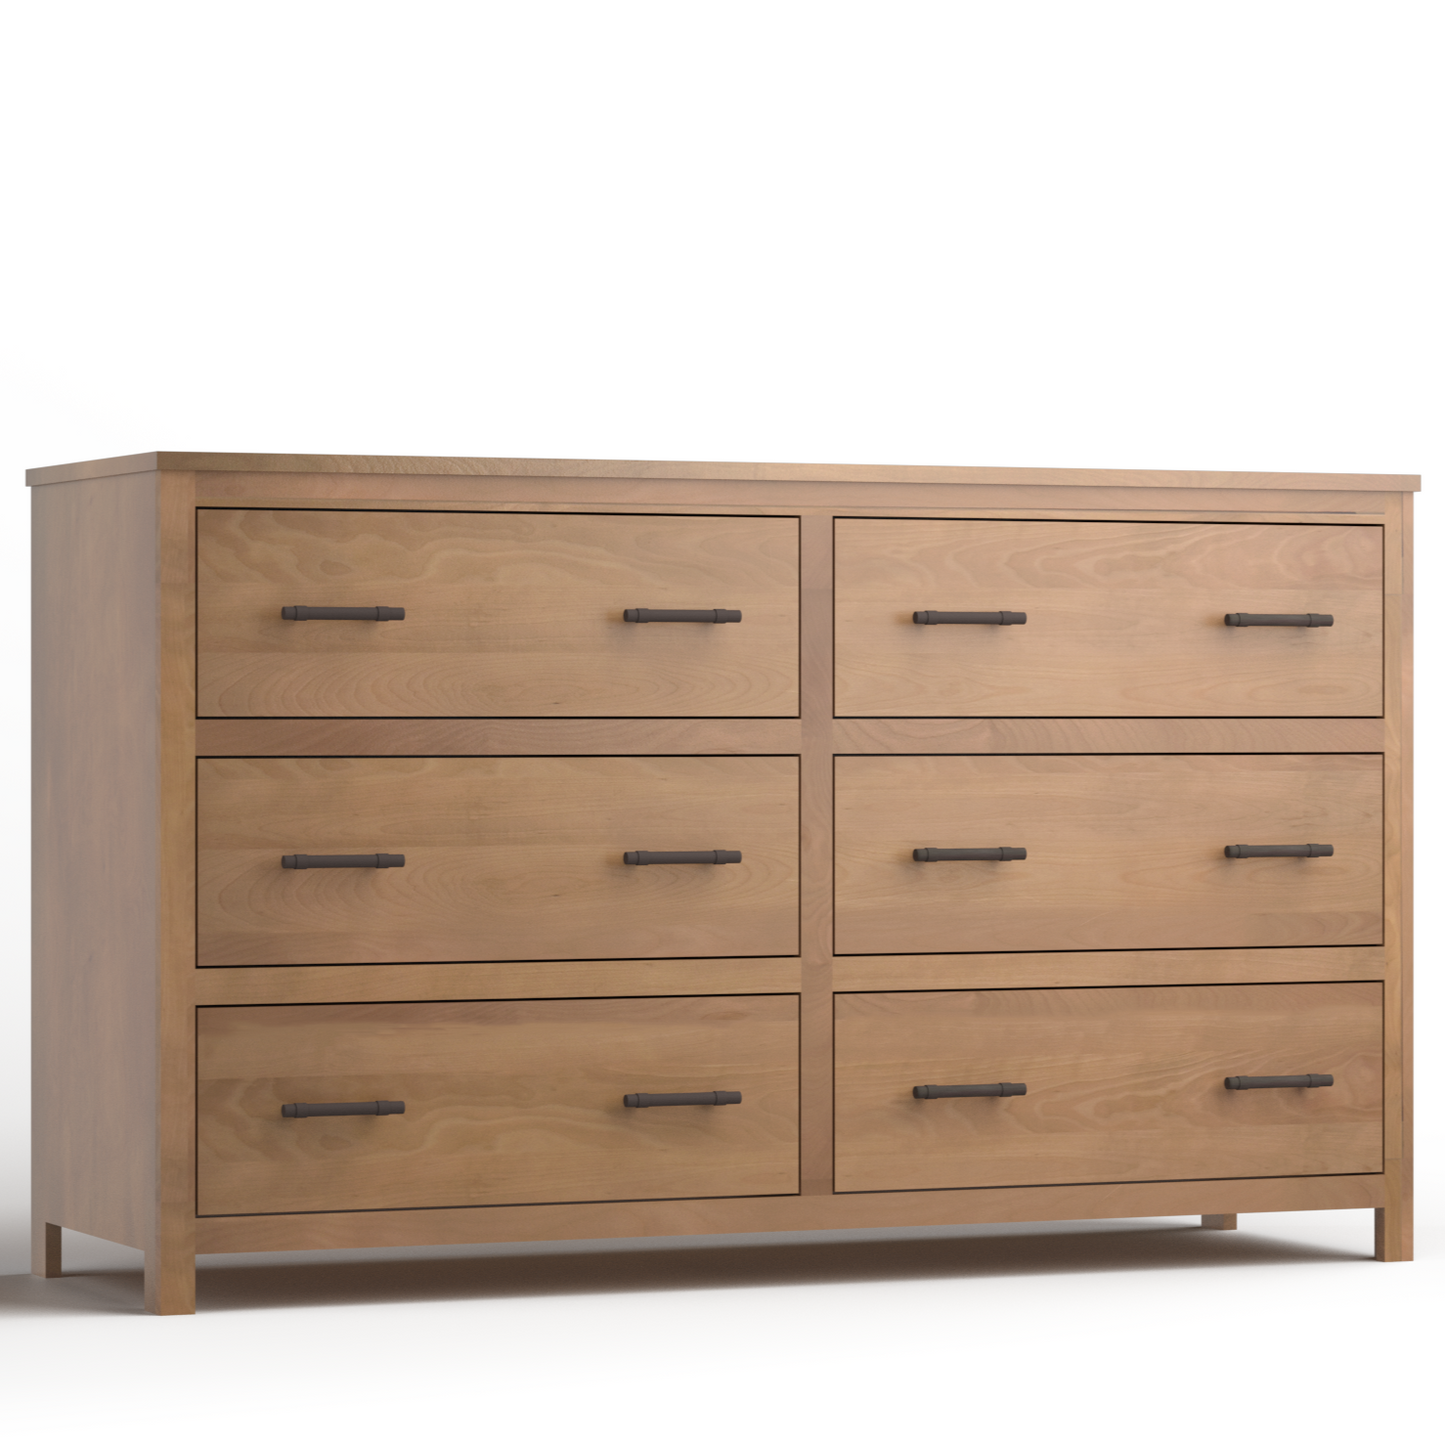 Acadia Tremont Six Drawer Dresser features 6 large drawers and hardwood construction. Shown in Nutmeg finish.